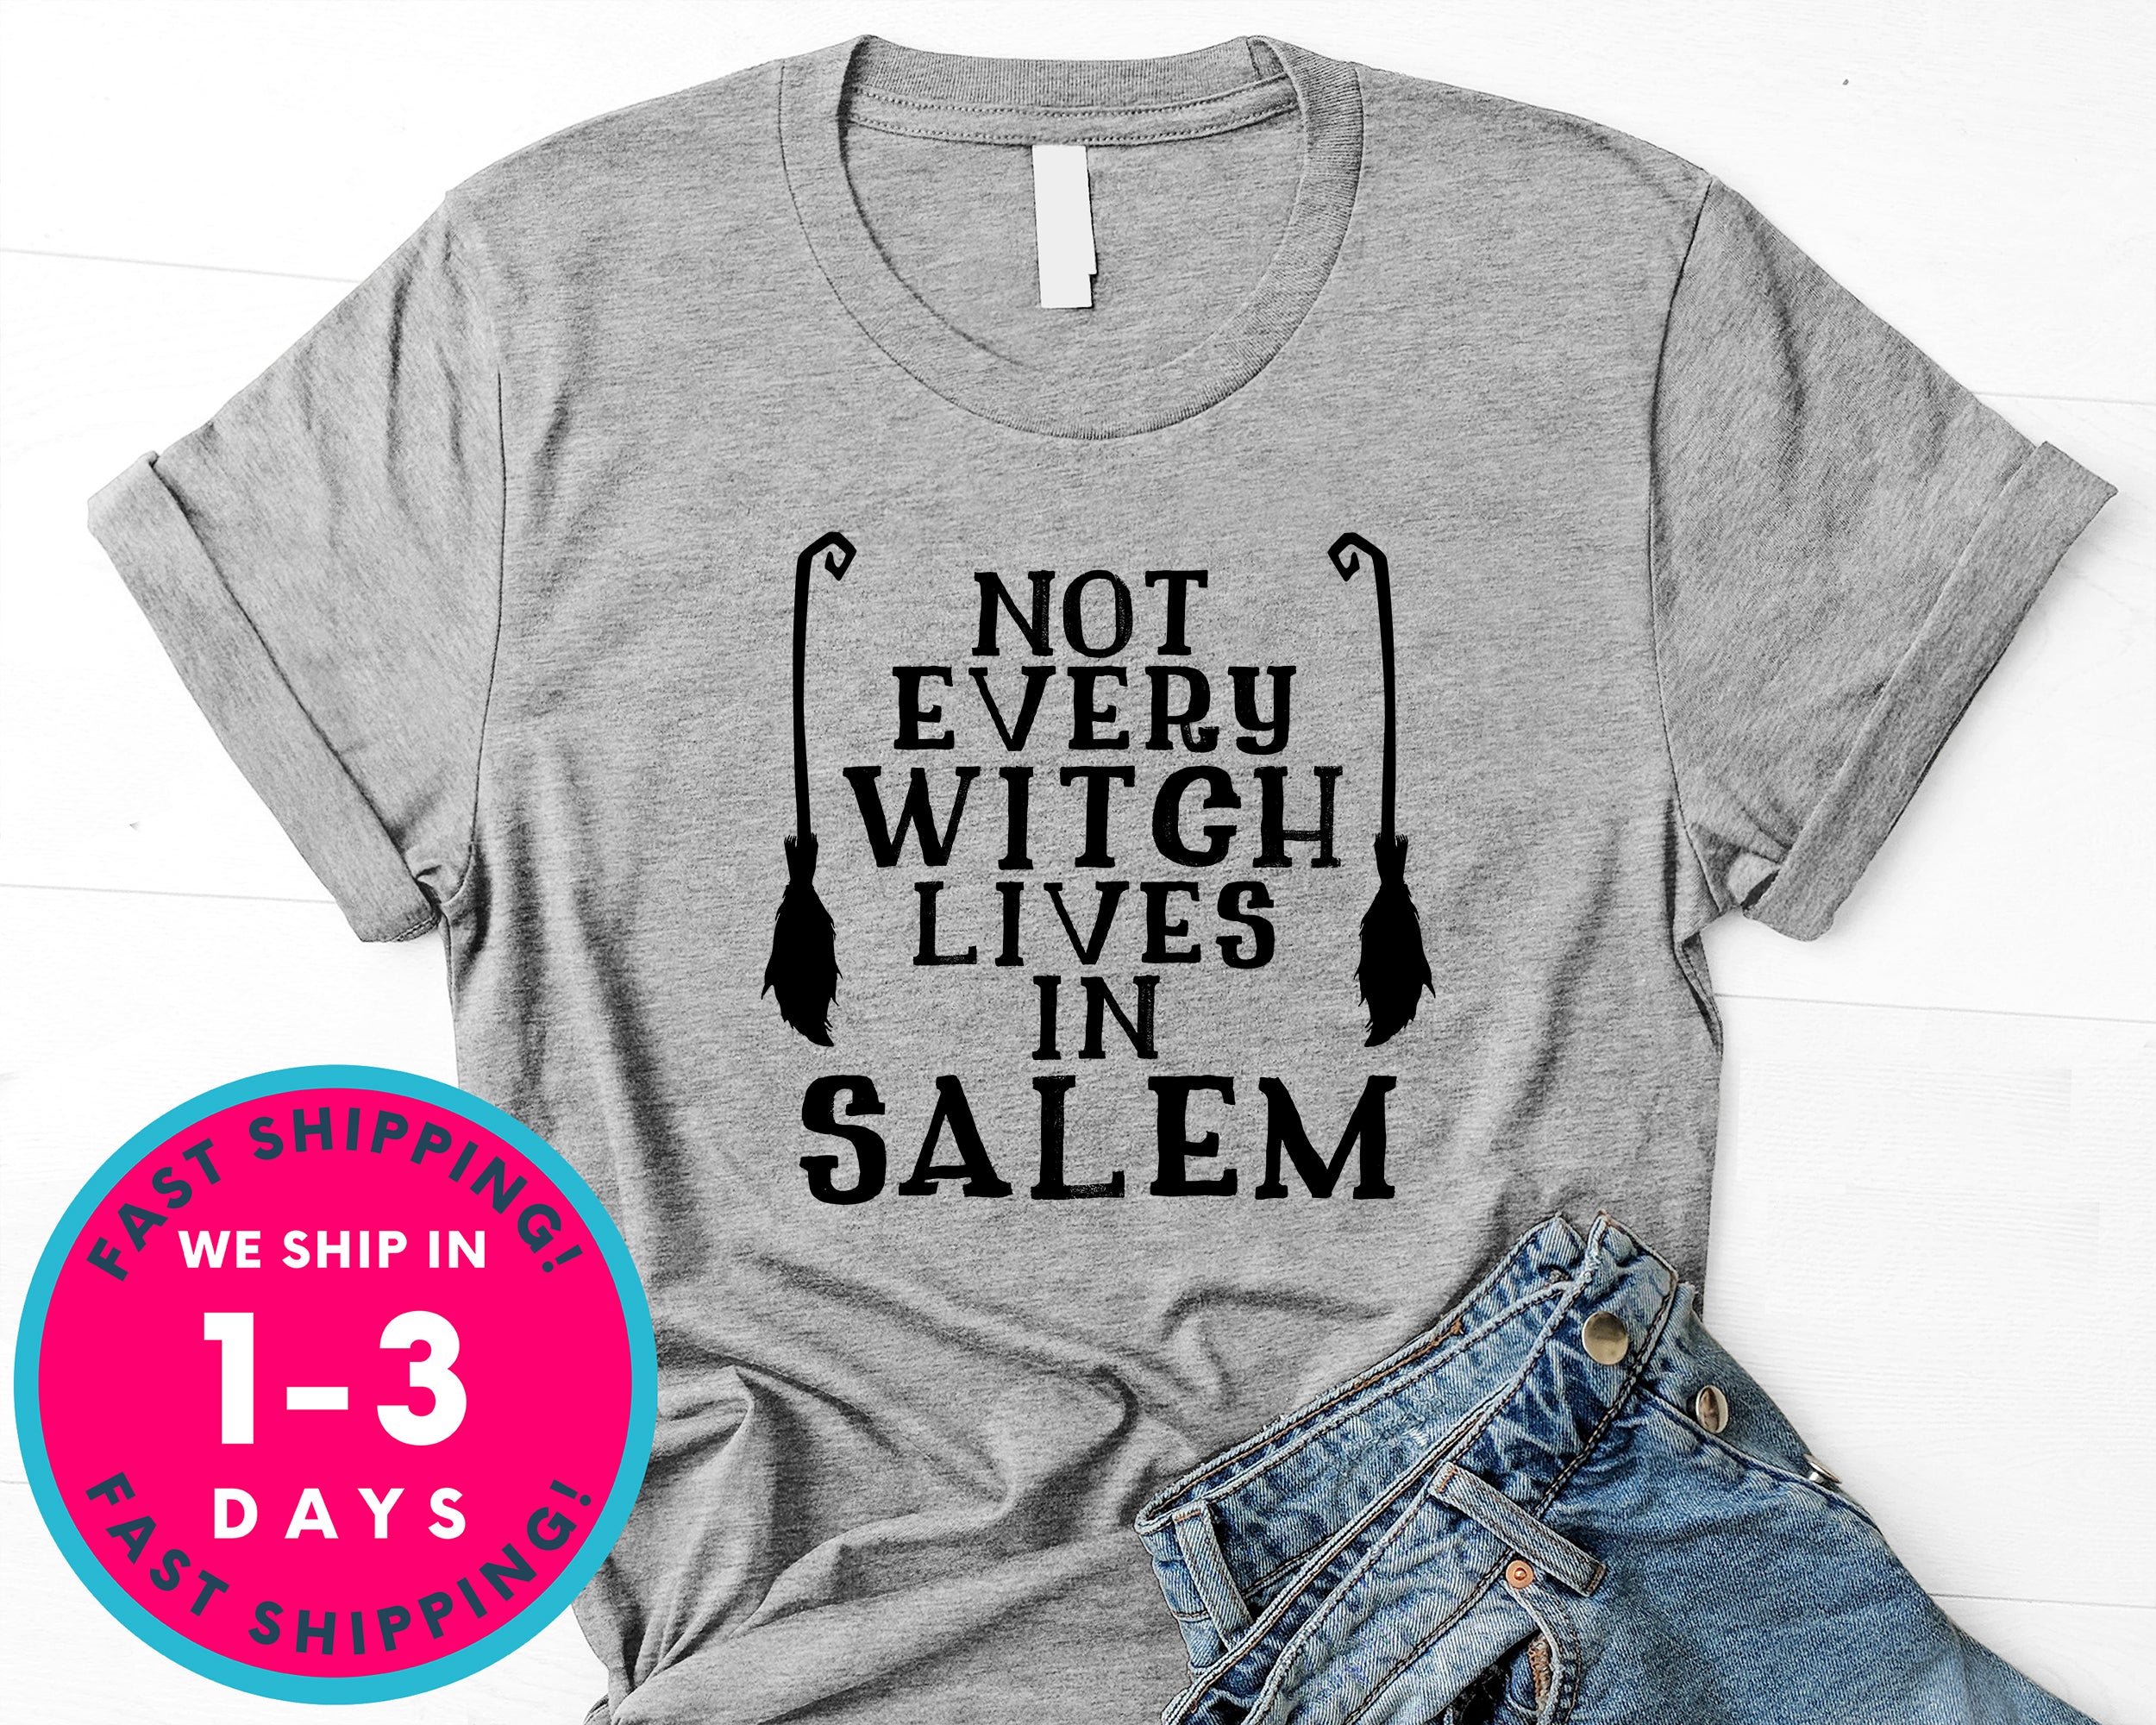 Not Every Witch Lives In Salem T-Shirt - Halloween Horror Scary Shirt